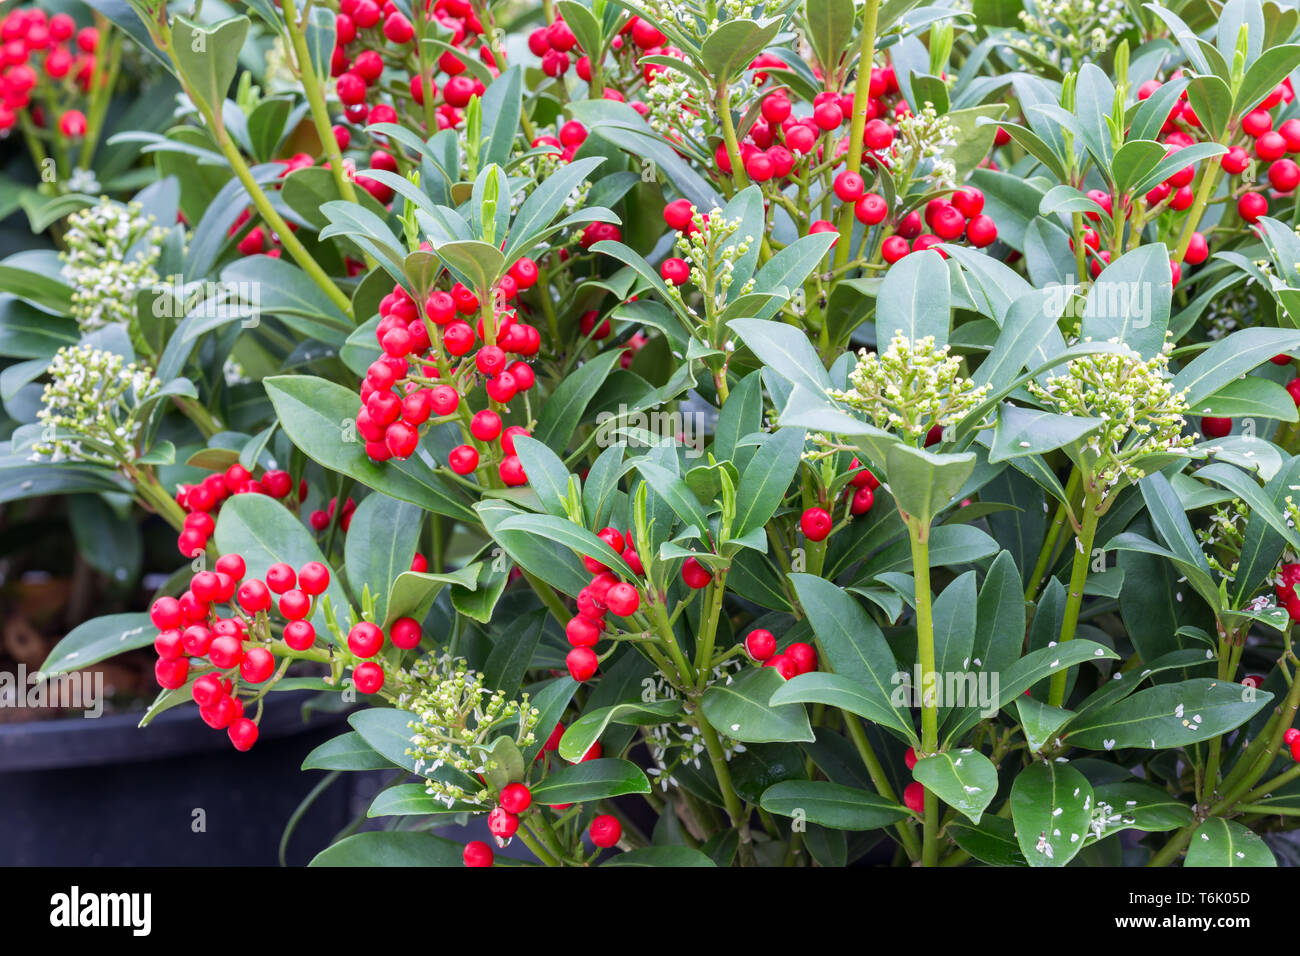 Green shrub (Skimmia) with red fruits in Dutch greenhouse Stock Photo